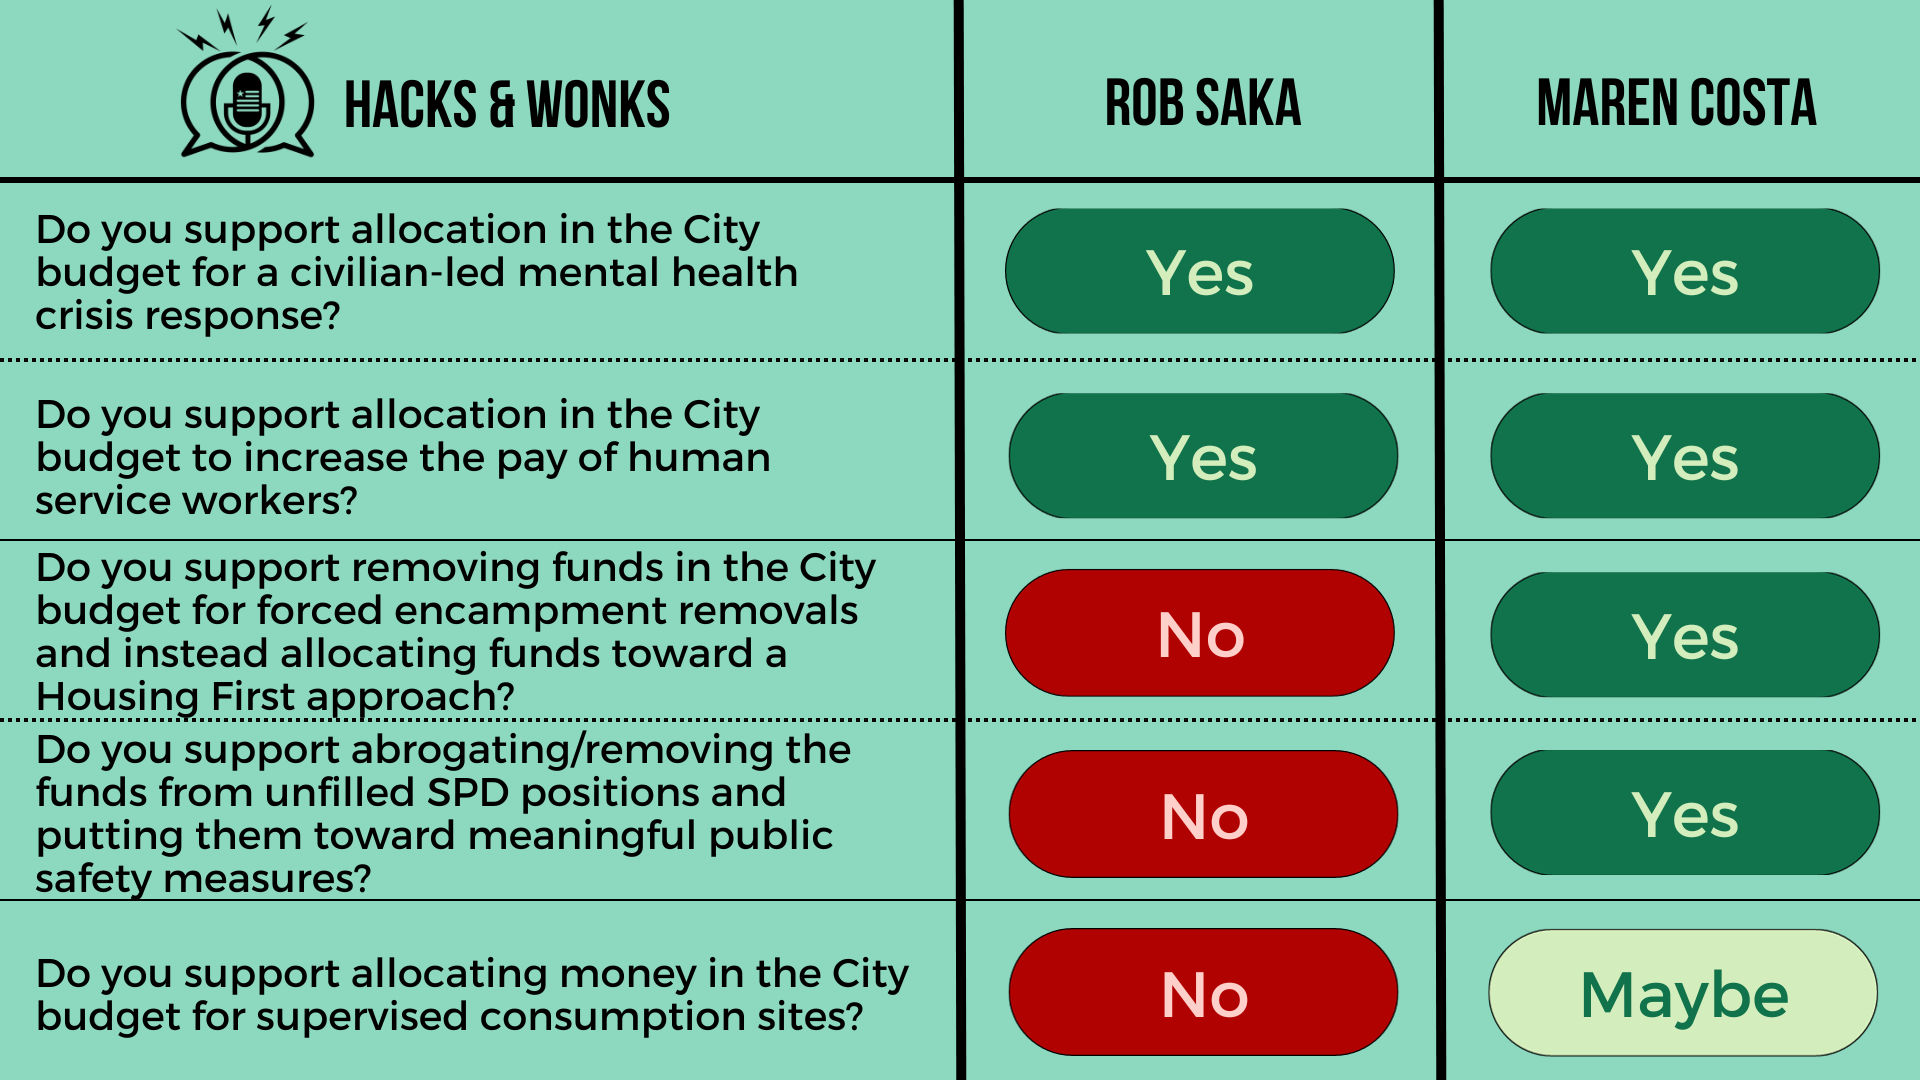 Q: Do you support allocation in the City budget for a civilian-led mental health crisis response? Rob Saka: Yes, Maren Costa: Yes  Q: Do you support allocation in the City budget to increase the pay of human service workers? Rob Saka: Yes, Maren Cost